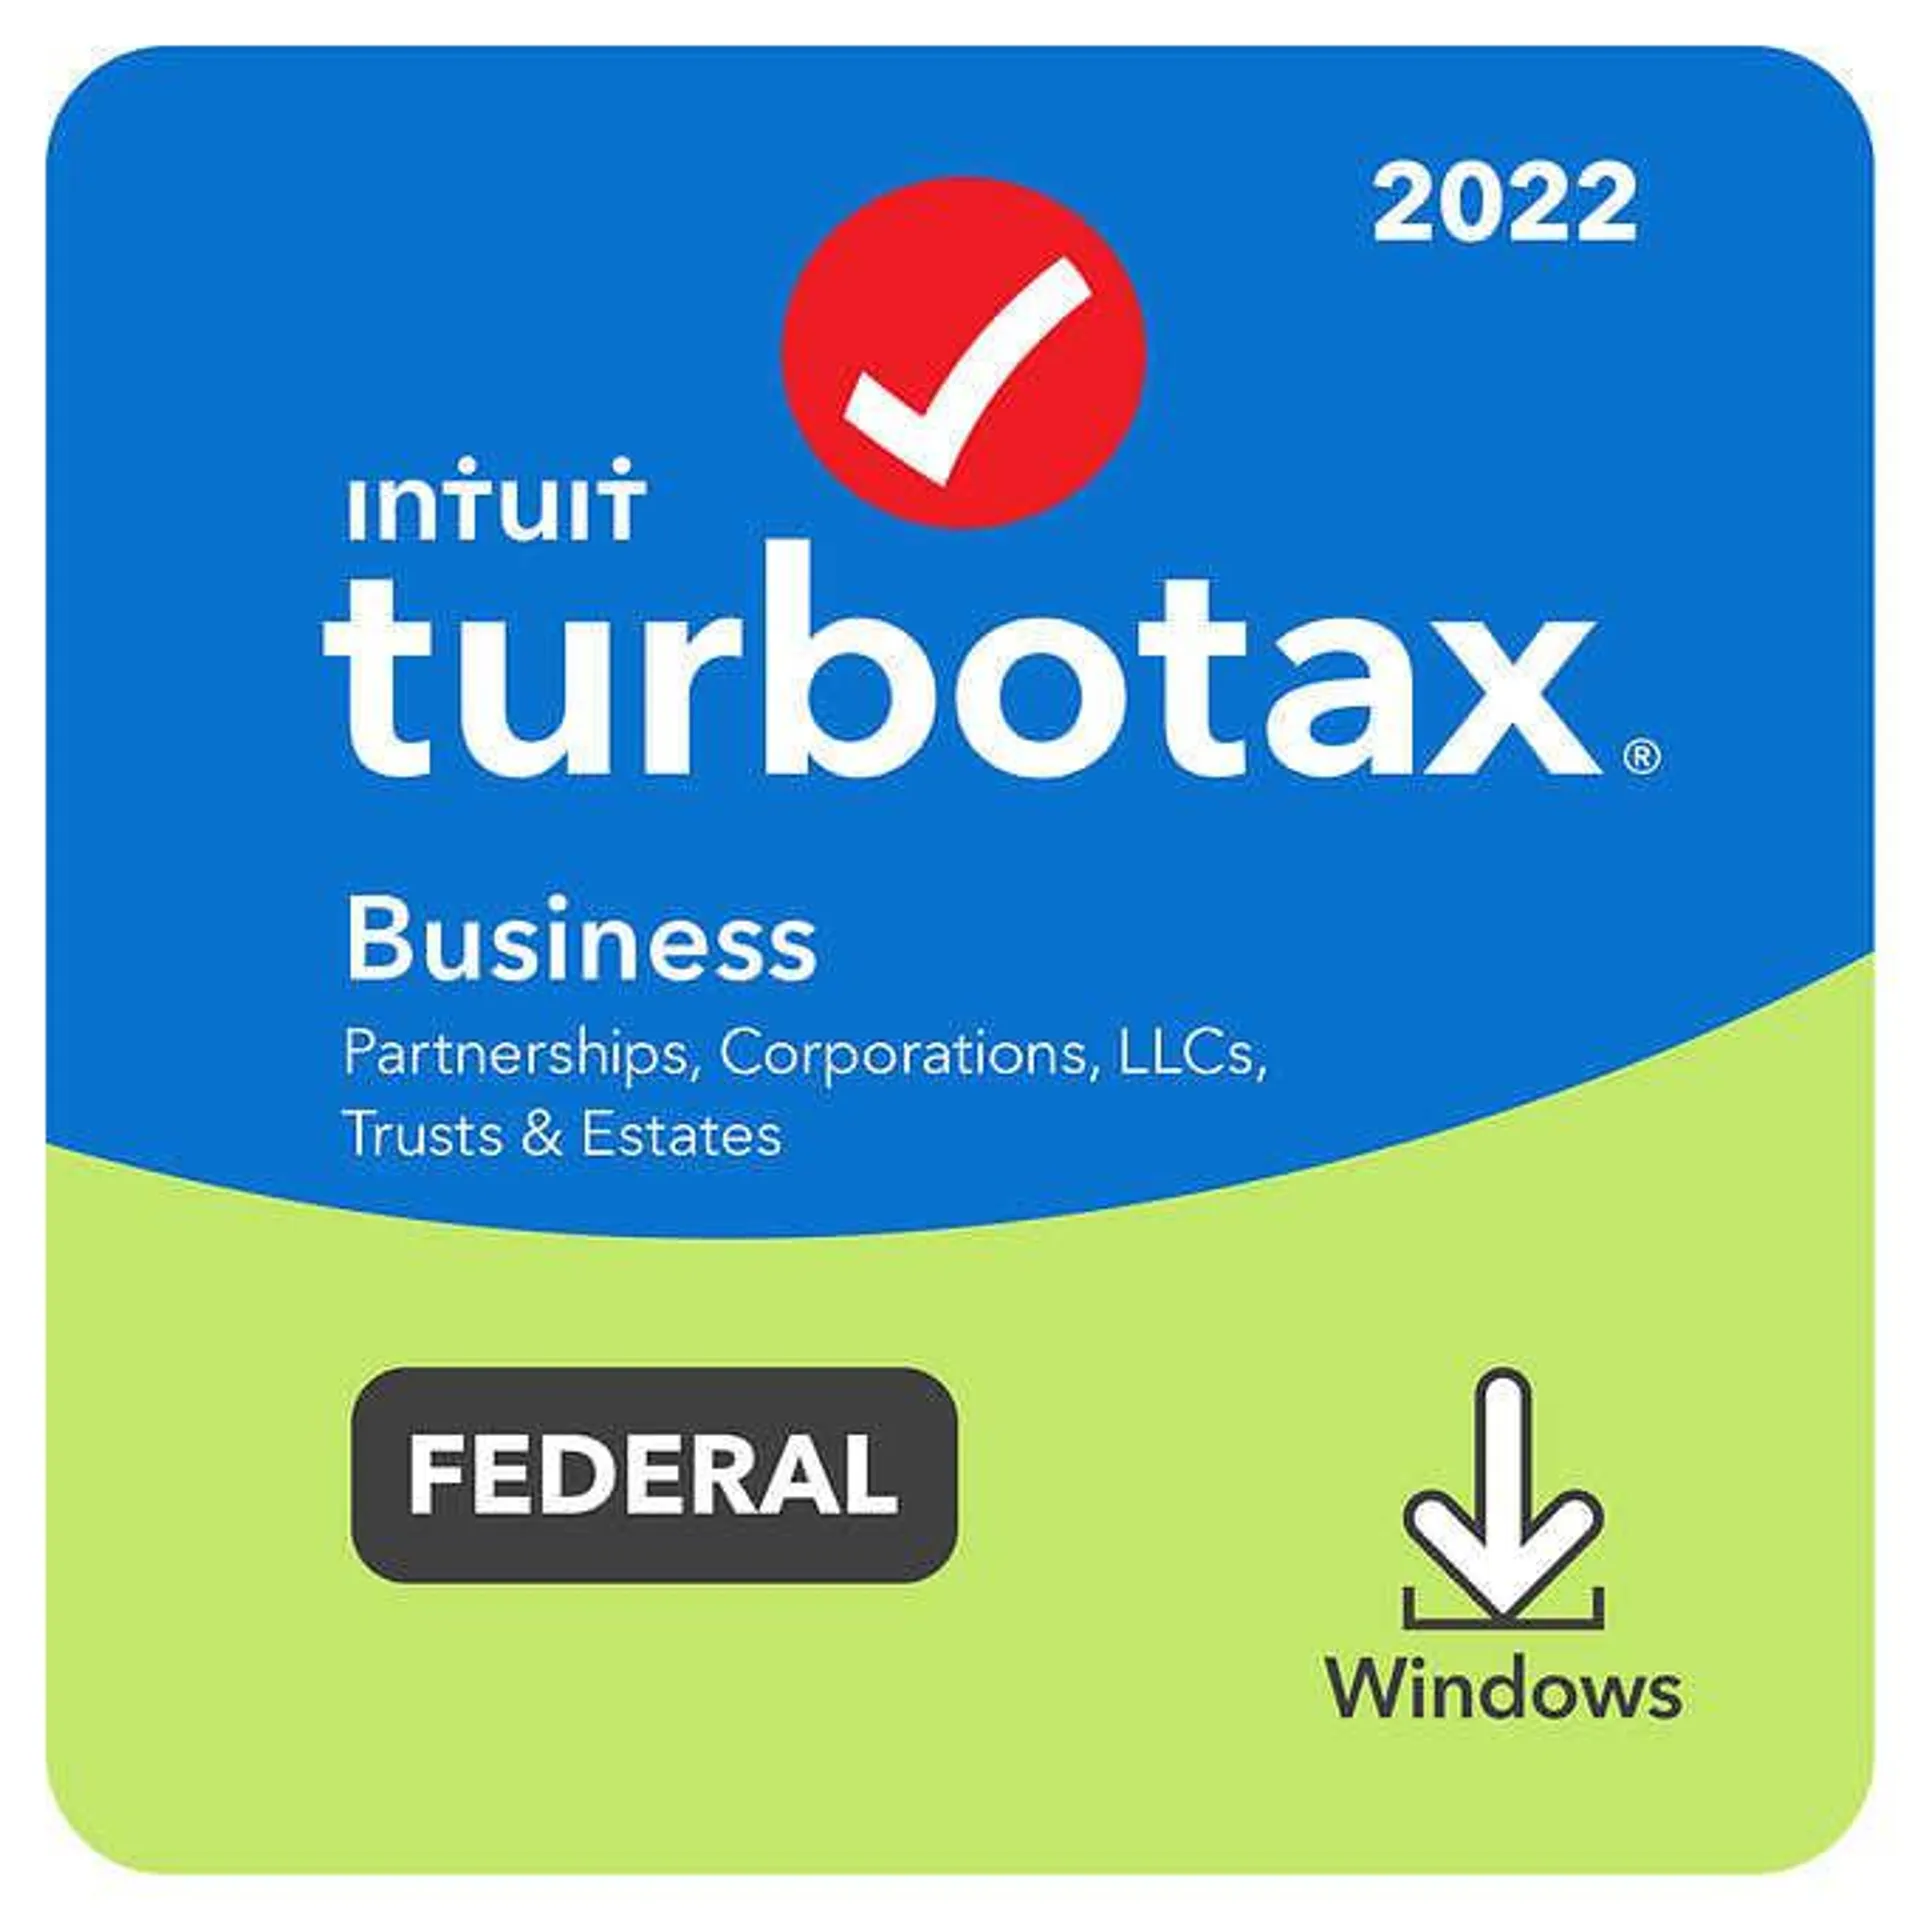 TurboTax Business 2022 Federal Only E-File, for PC, Includes $10 Credit In-Product*